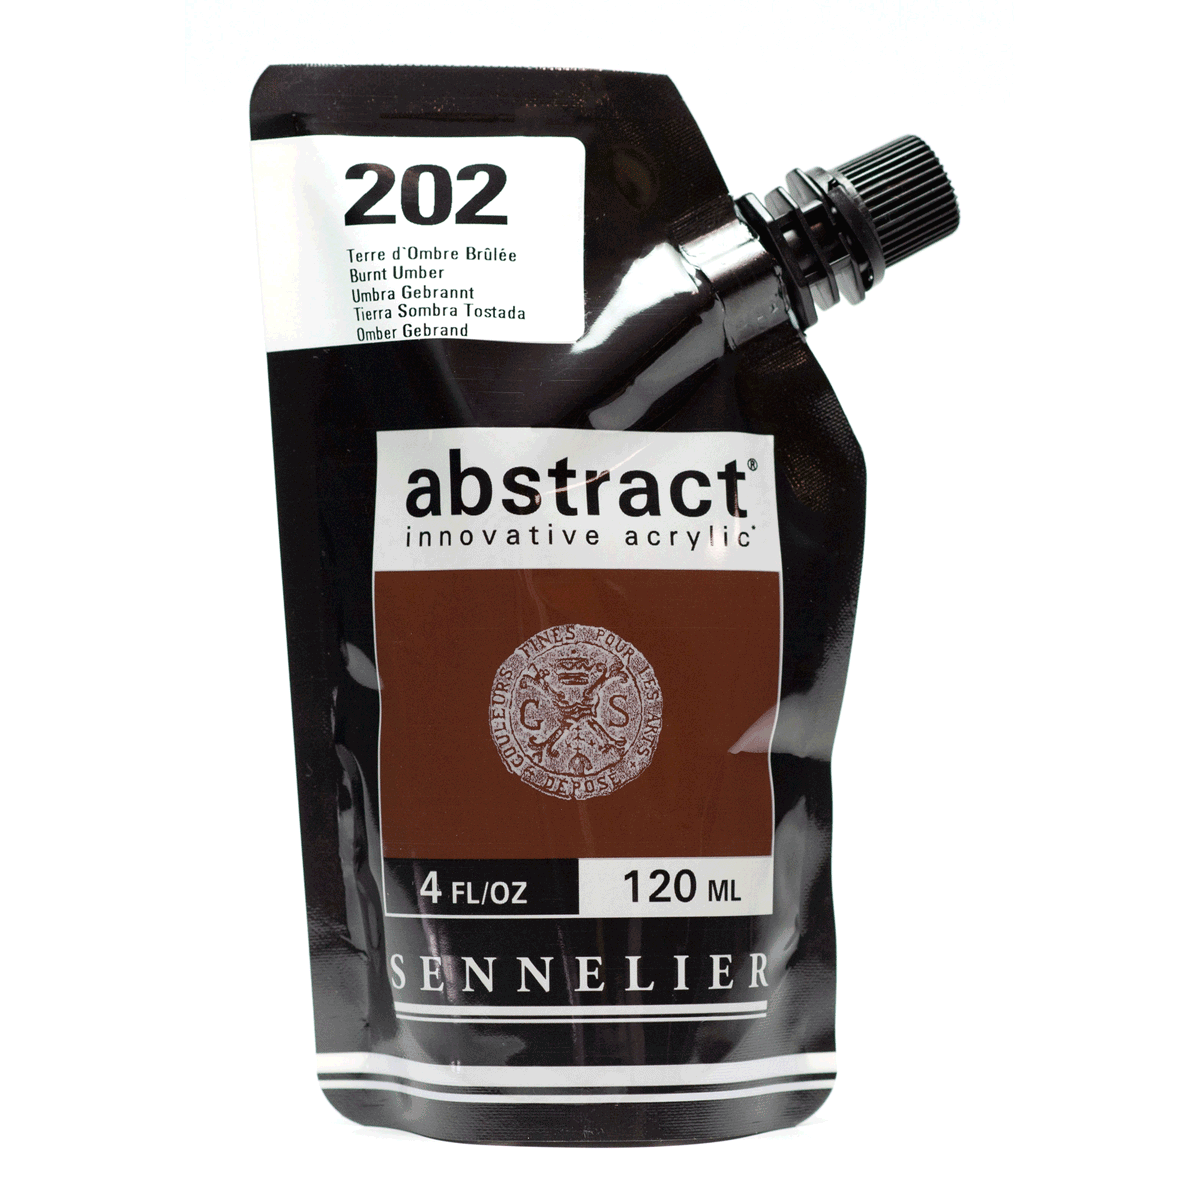 Abstract Acrylic Pouch - Satin 202 Burnt Umber 120ml